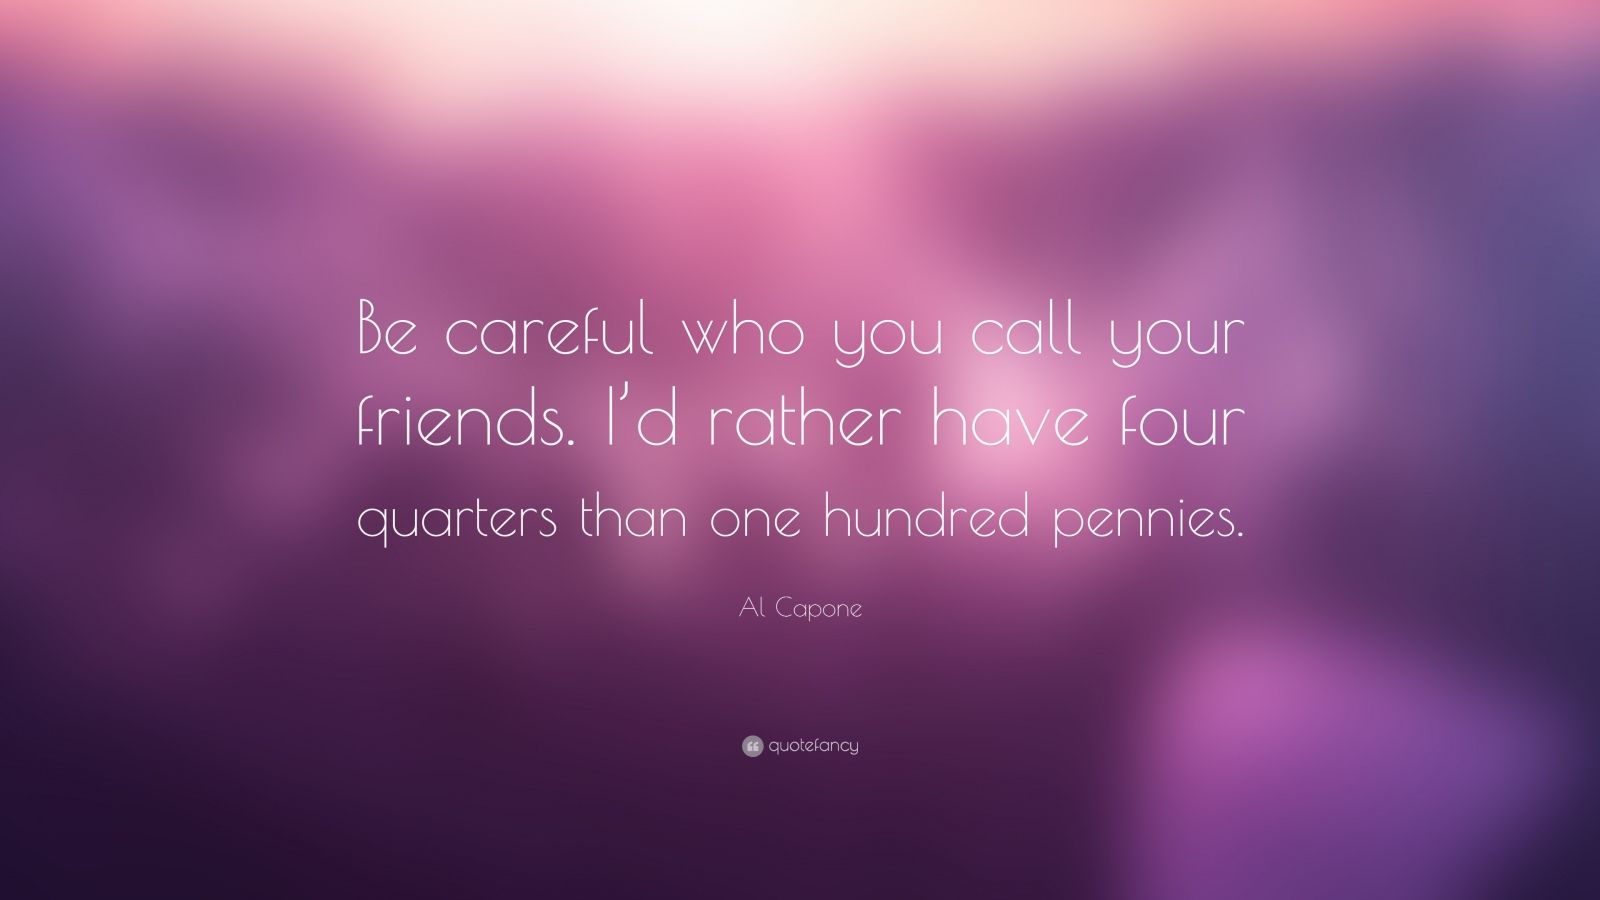 Al Capone Quote: “Be careful who you call your friends. I’d rather have ...